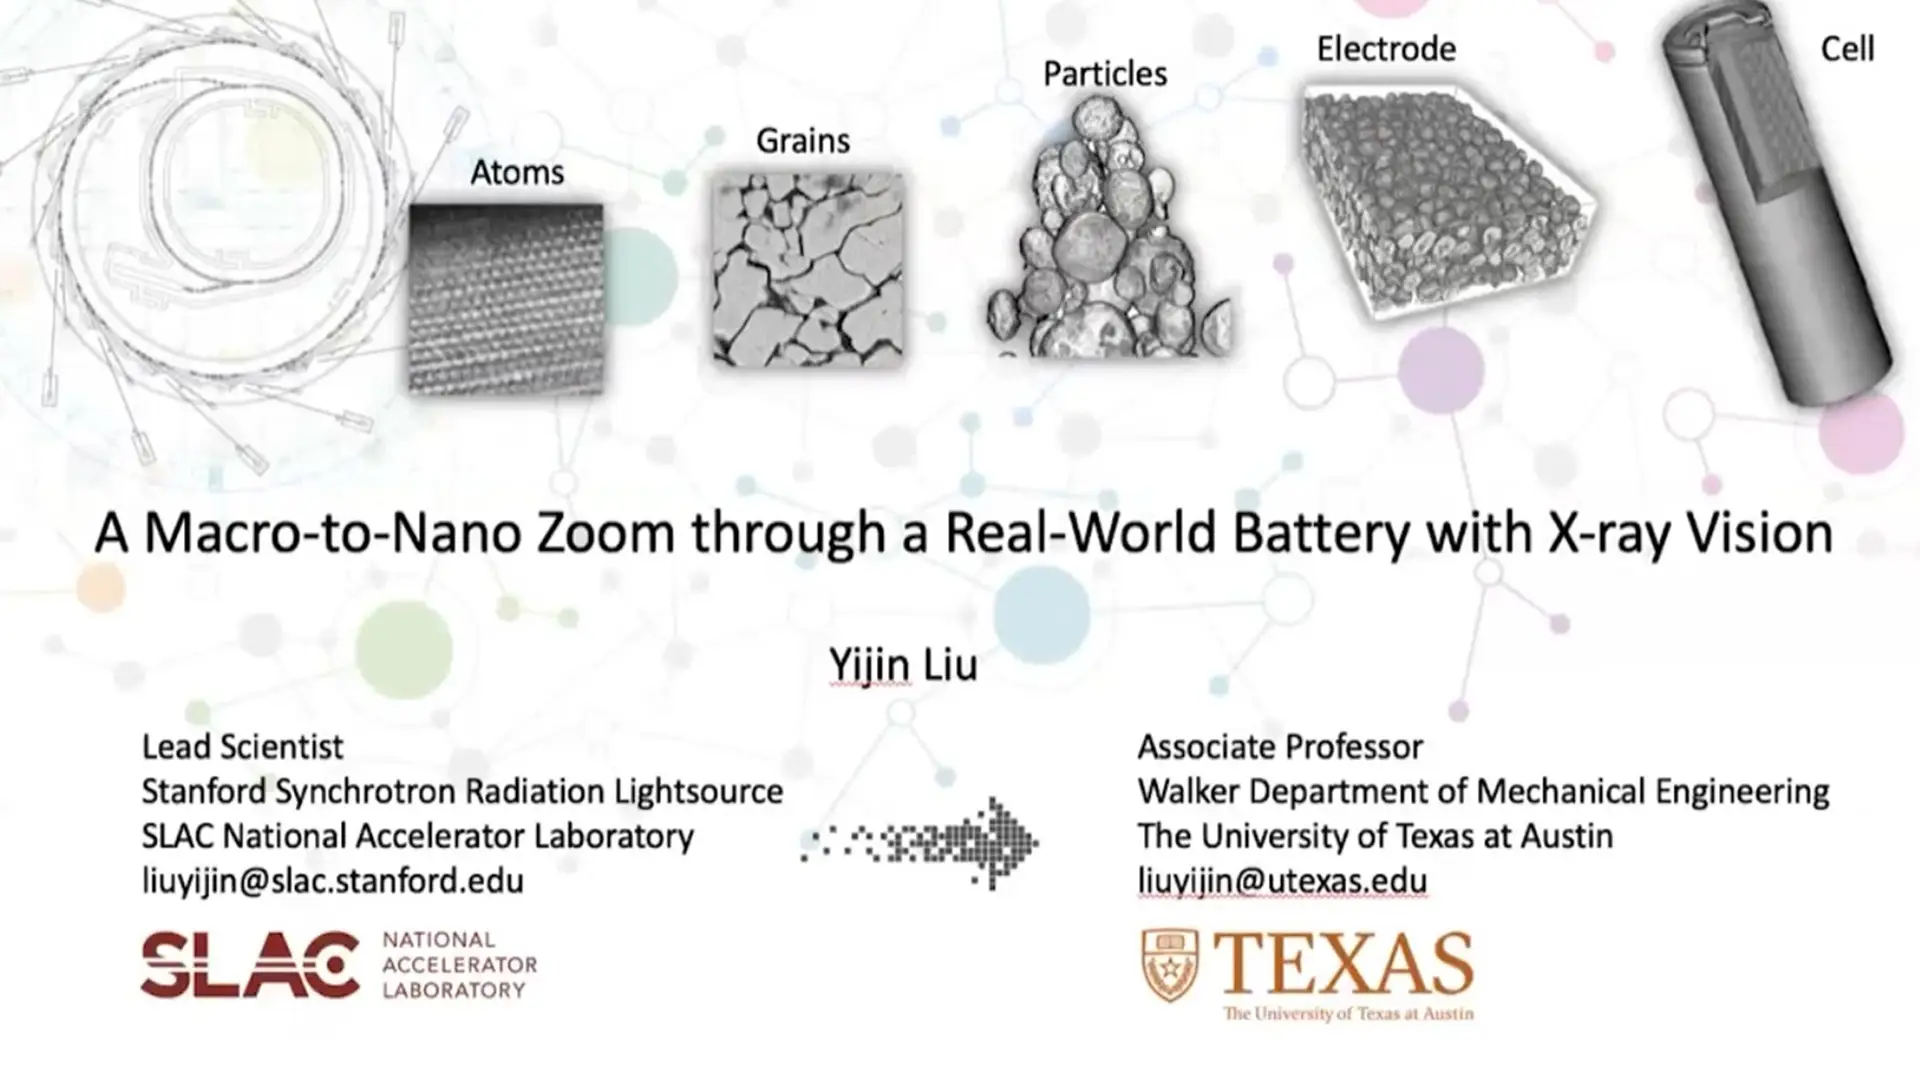 A Macro-to-nano Zoom through a Real-world Battery with X-ray Vision